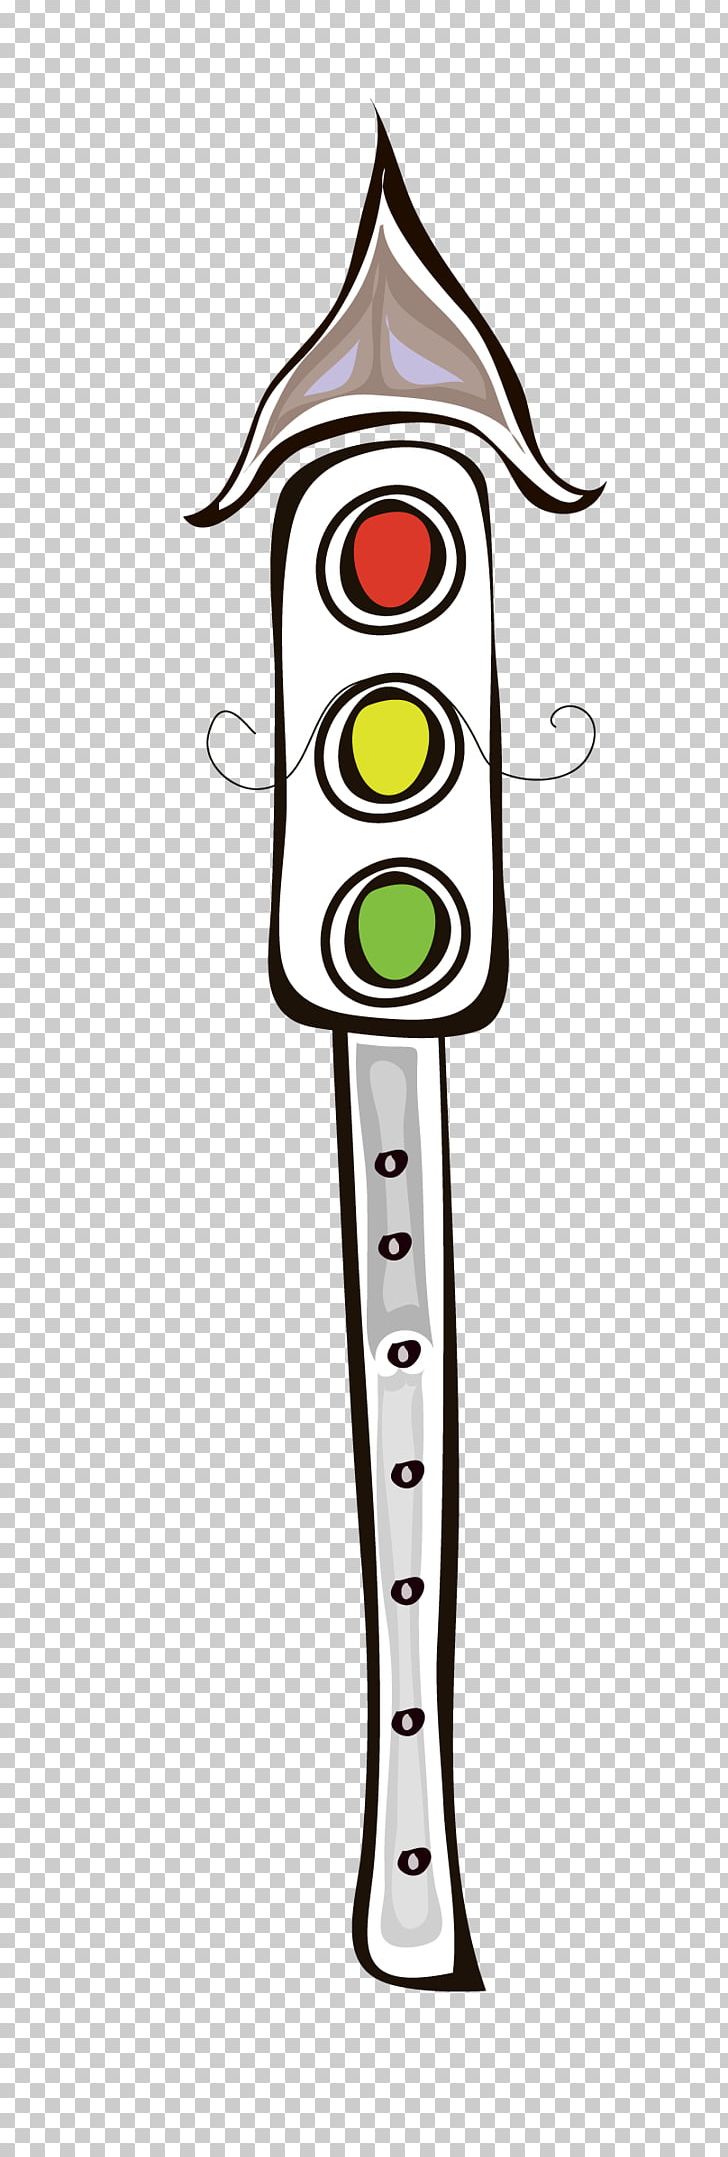 How to Draw a Traffic Light Step by Step  EasyLineDrawing